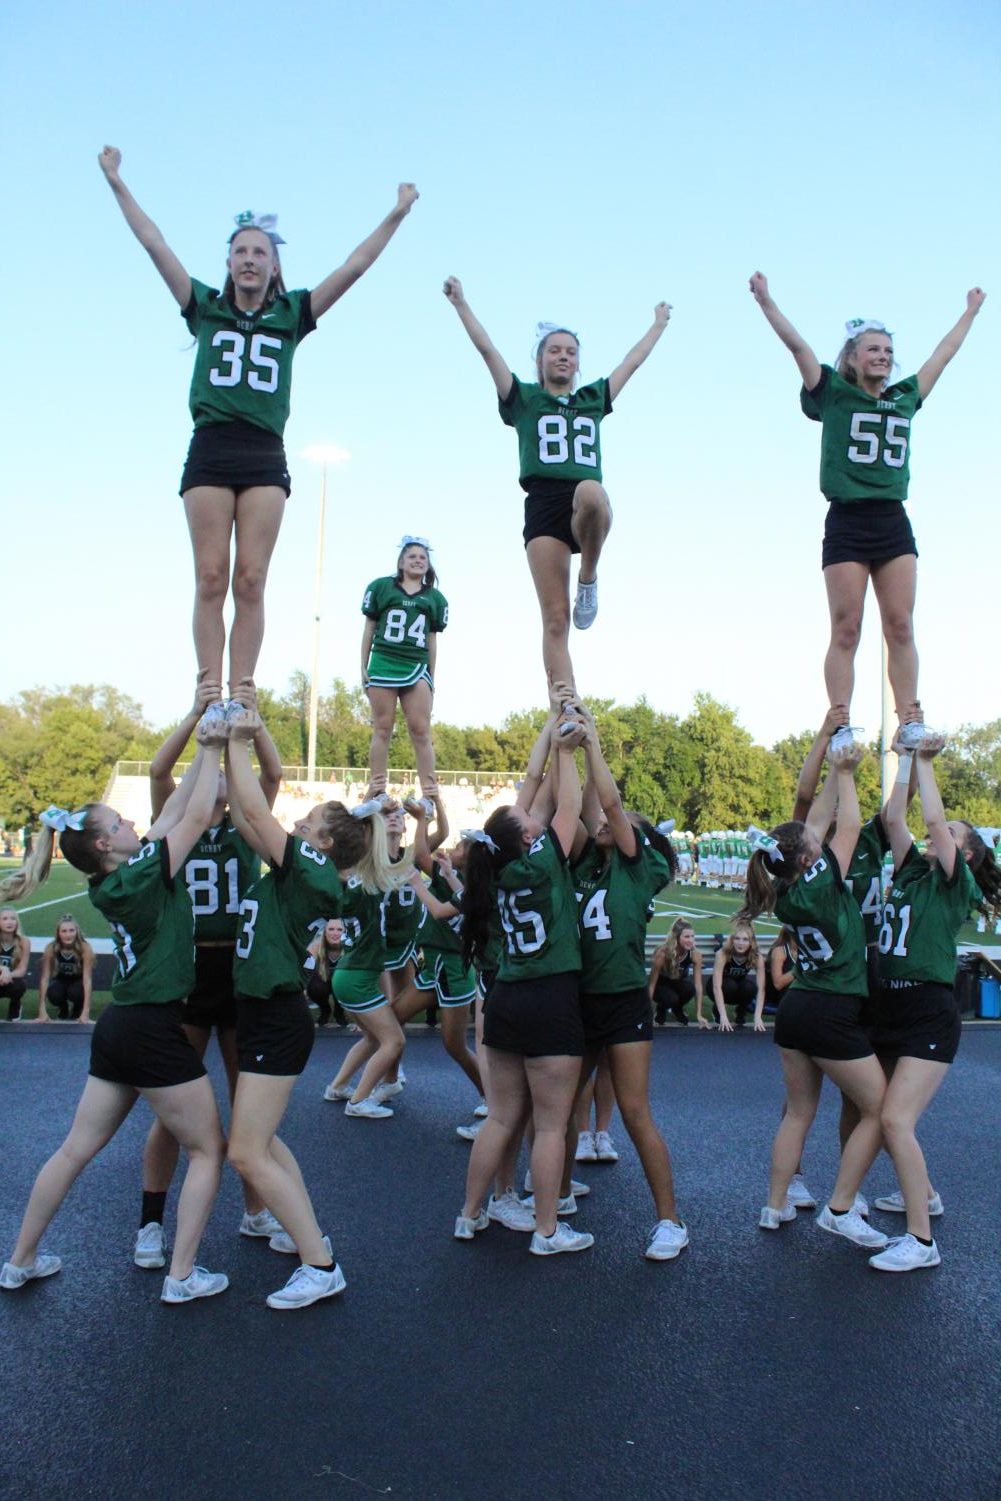 Derby+Cheer+and+Dance+Team+at+Homecoming+Football+Game+%28Photos+by+Agness+Mbezi%29